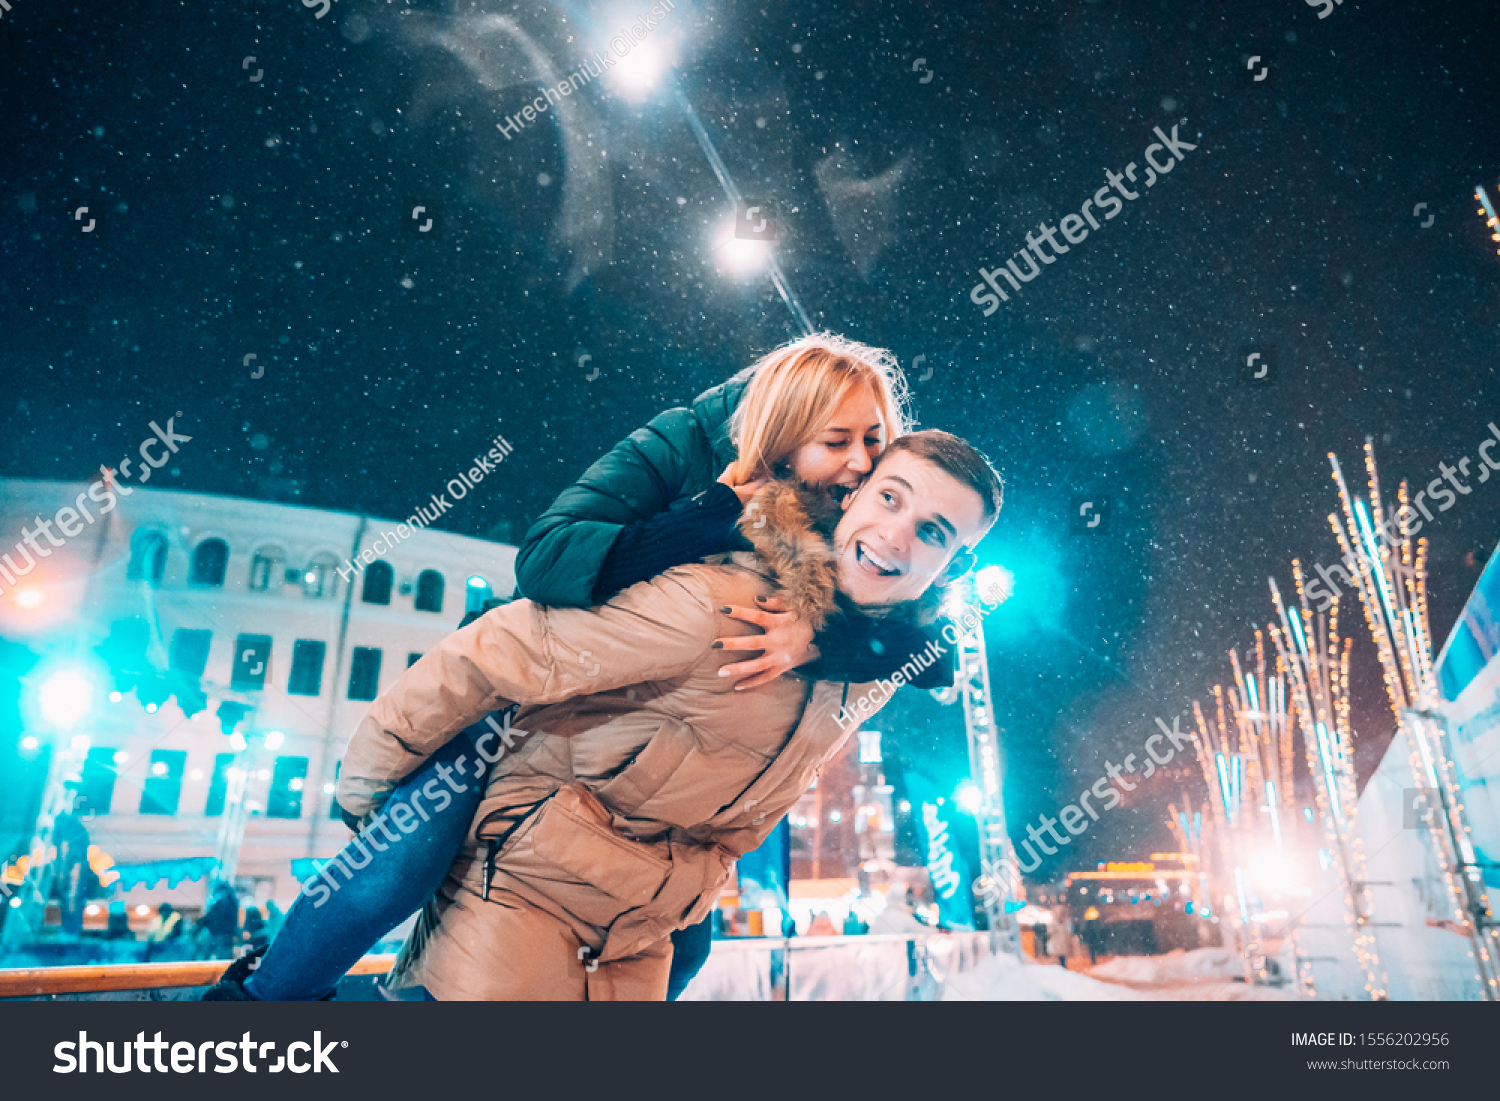 Cheerful and playful couple in warm winter outfits are fooling around #1556202956